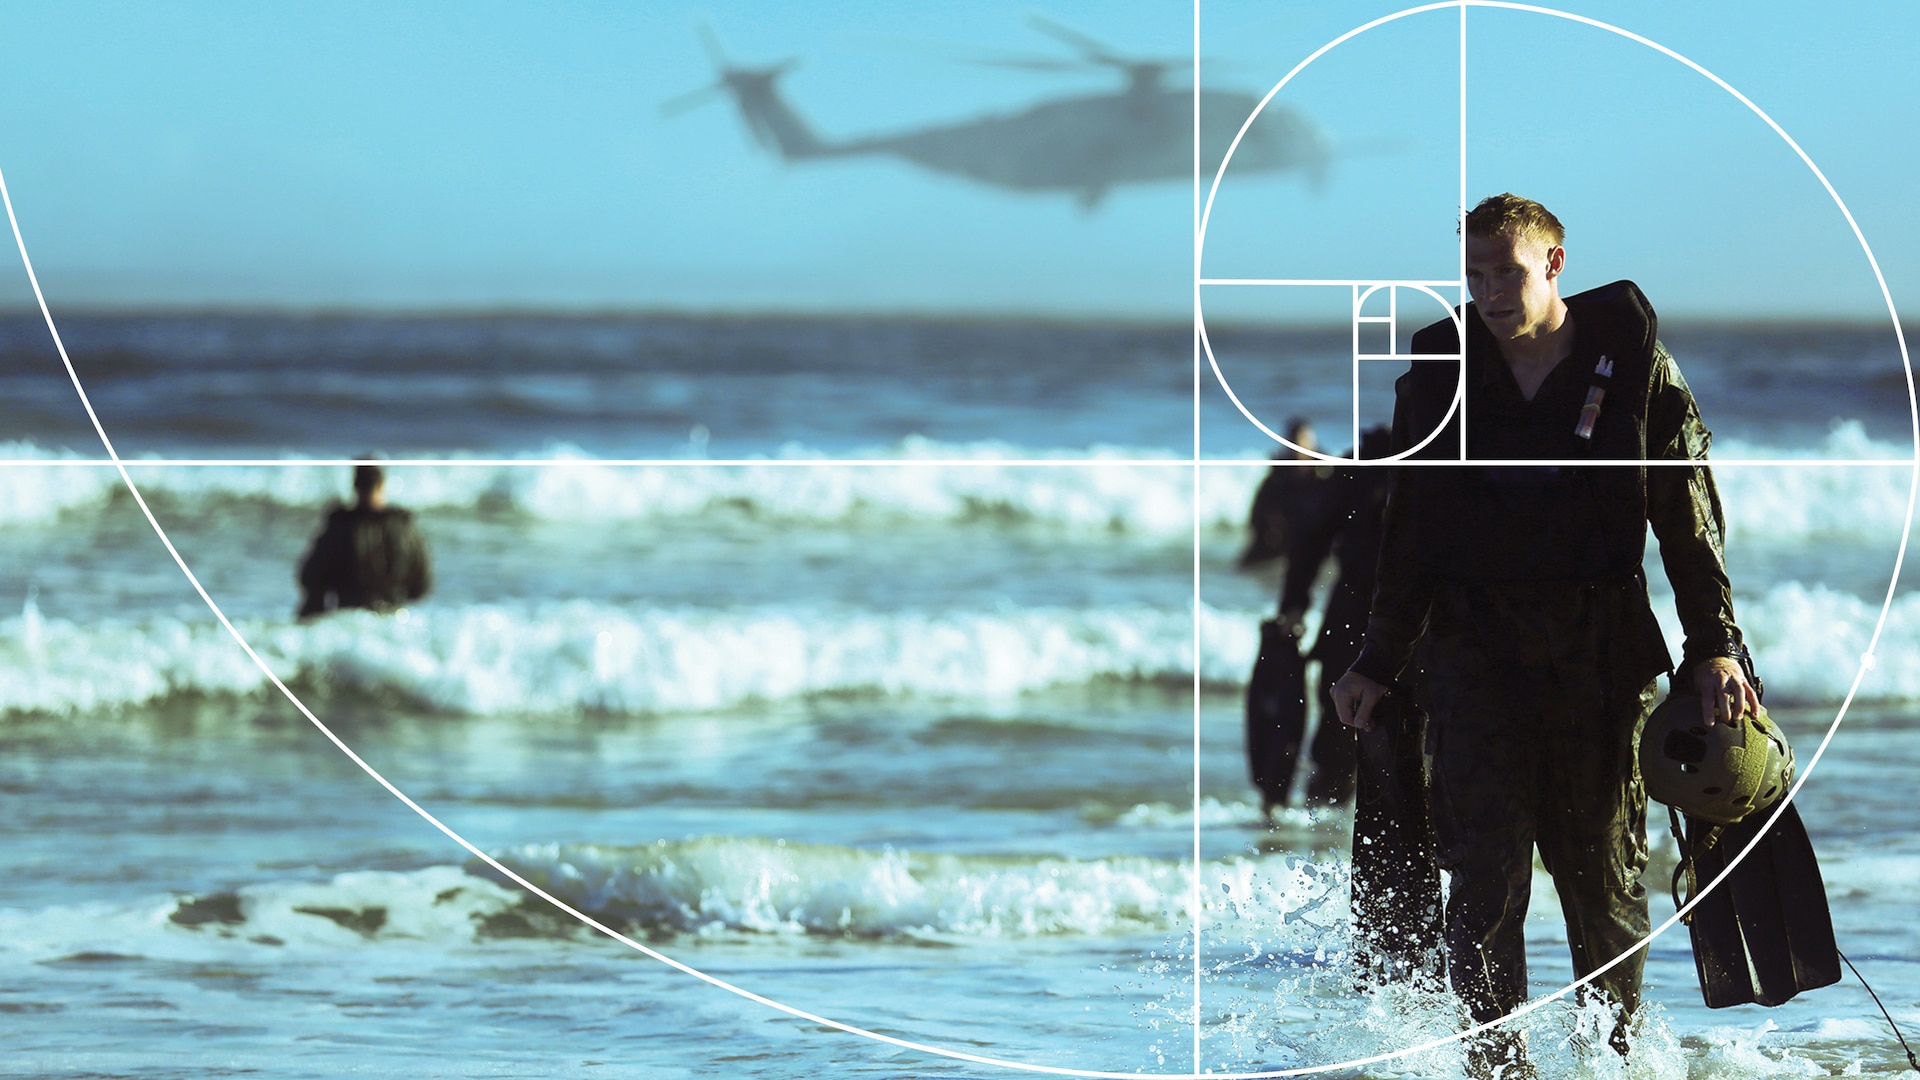 military diver emerging from the water with a golden triangle overlay on the image.